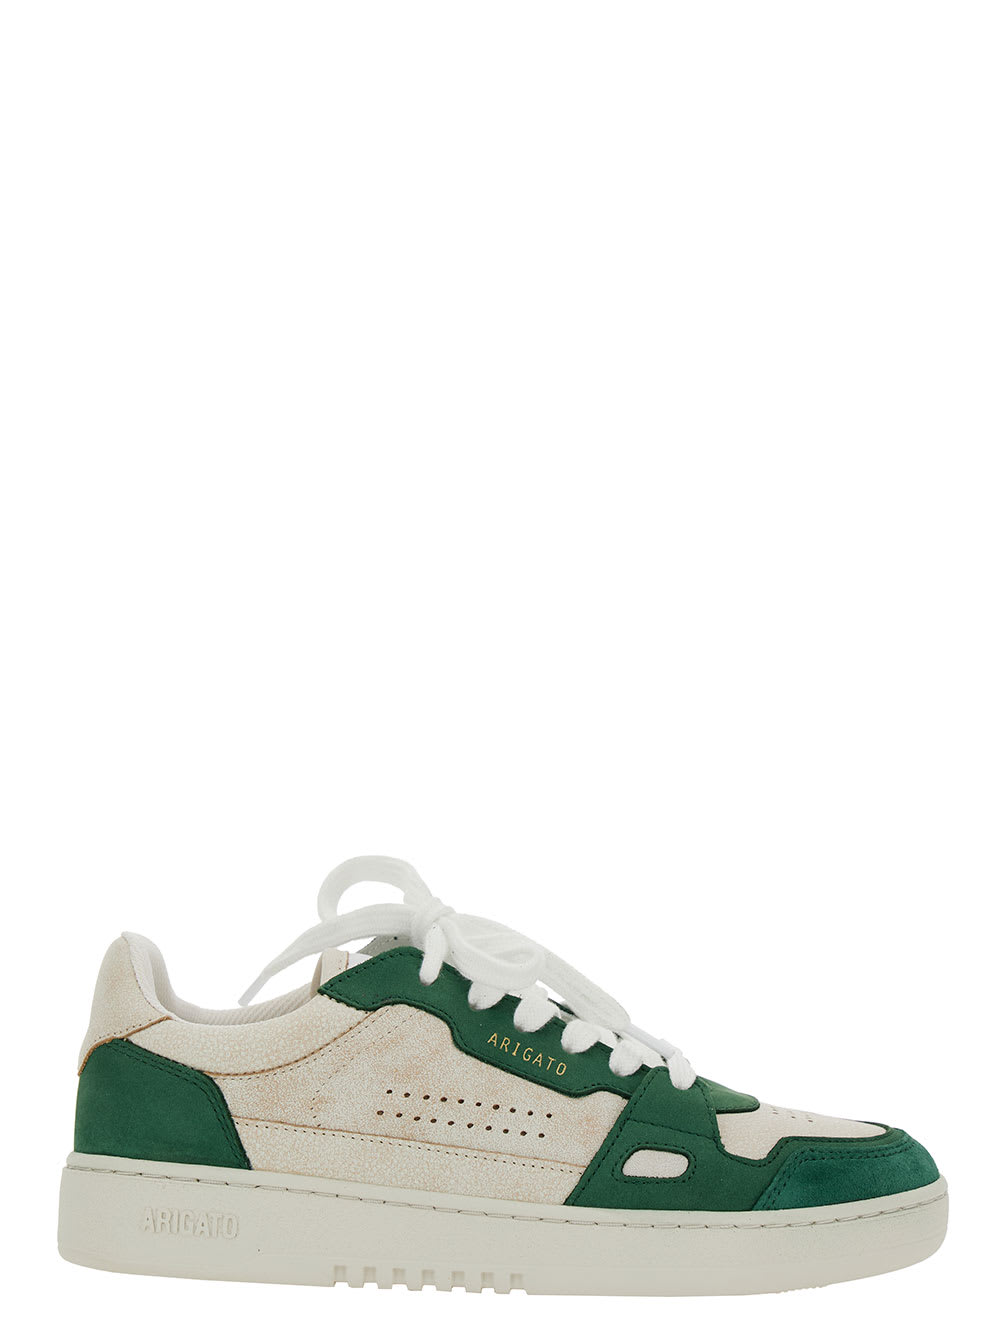 Axel Arigato Dice Low Green And White Low Top Sneakers With Embossed Logo And Vintage Effect In Leather Woman